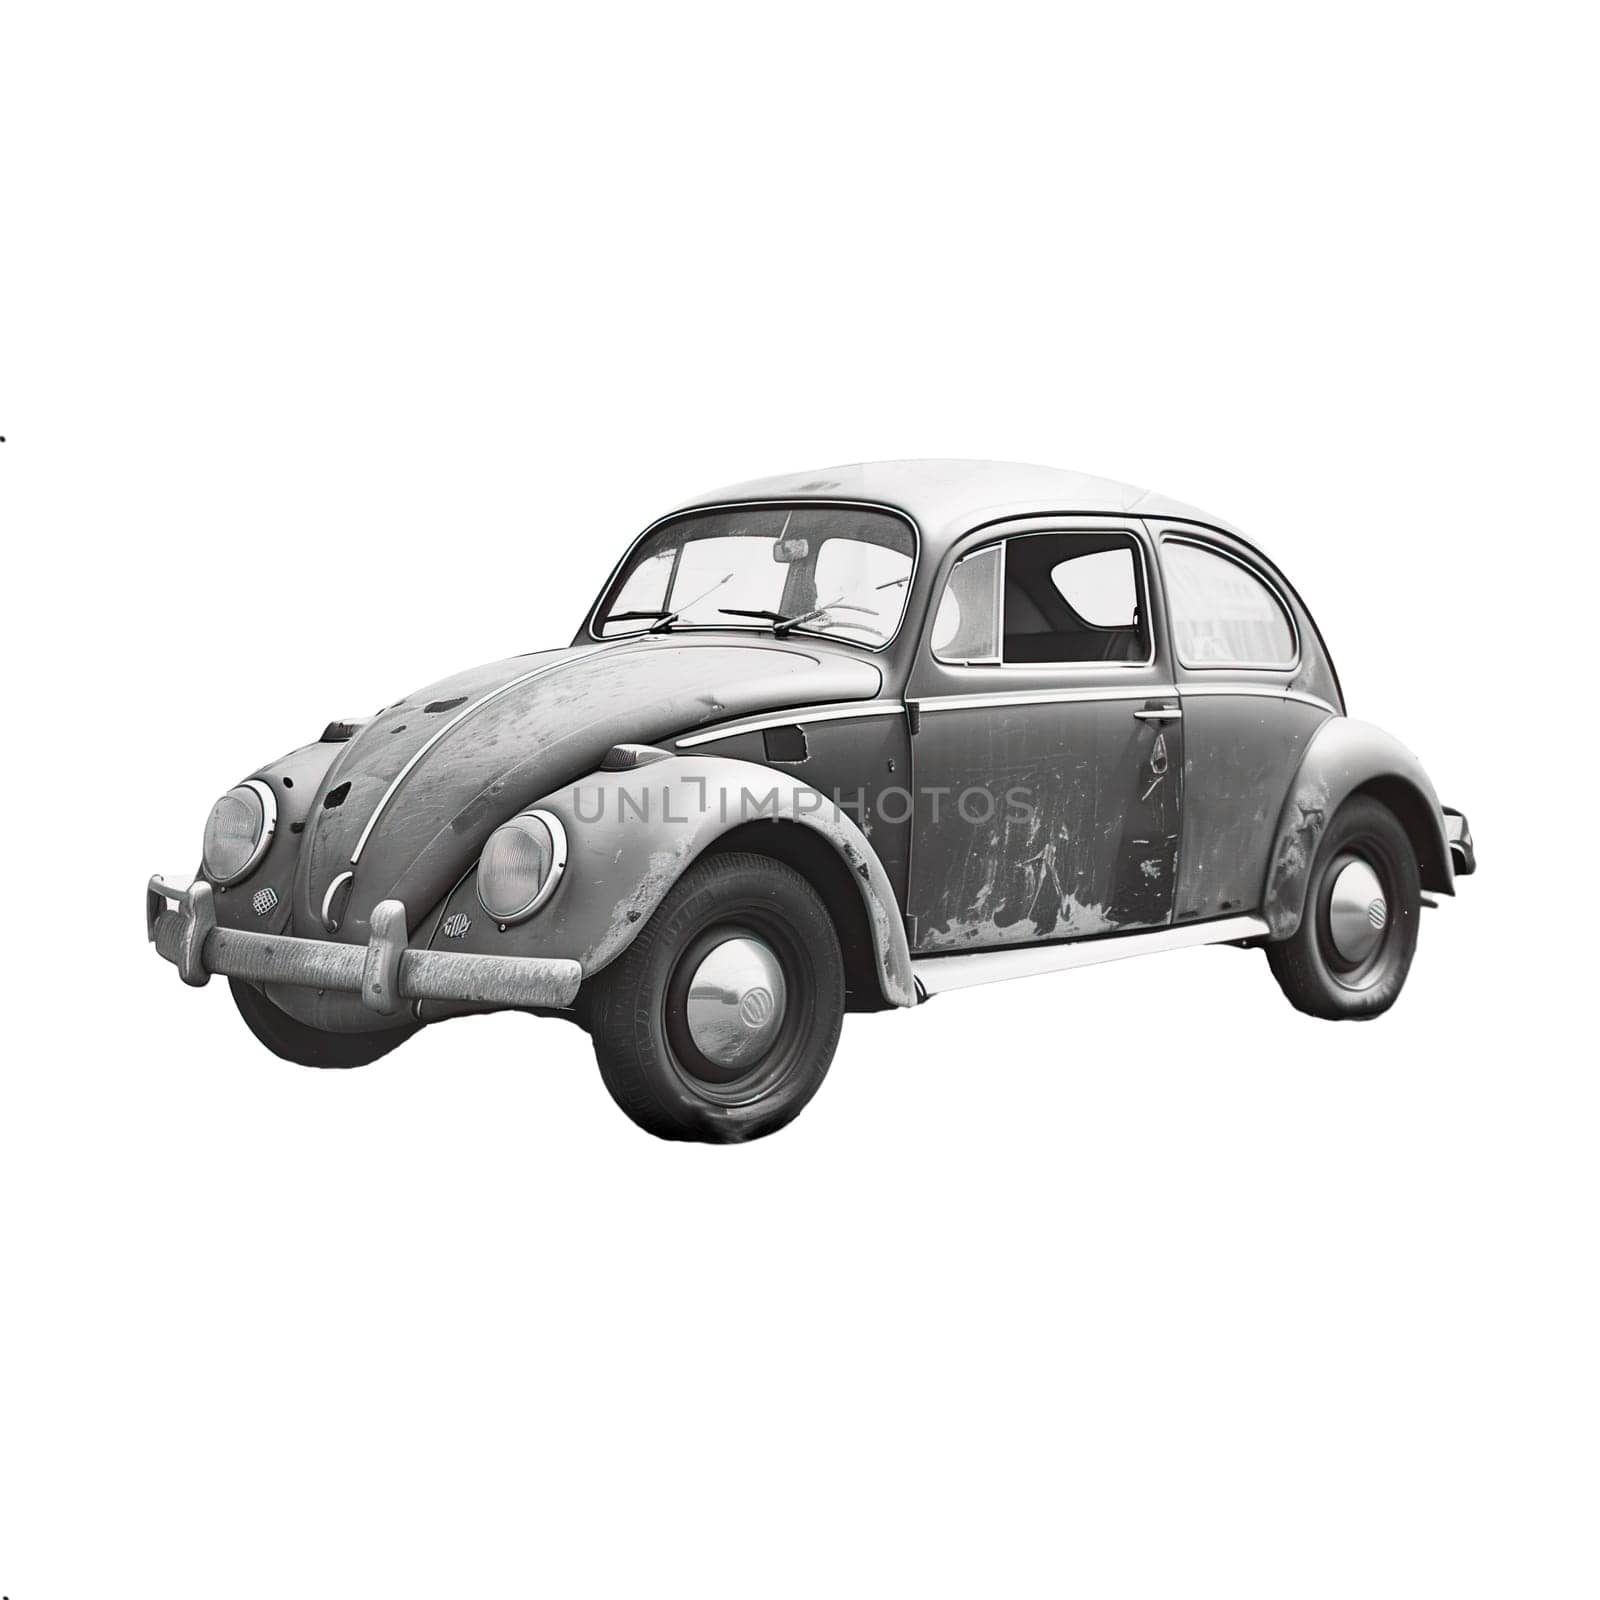 German vintage compact car black and white isolated photo by Dustick